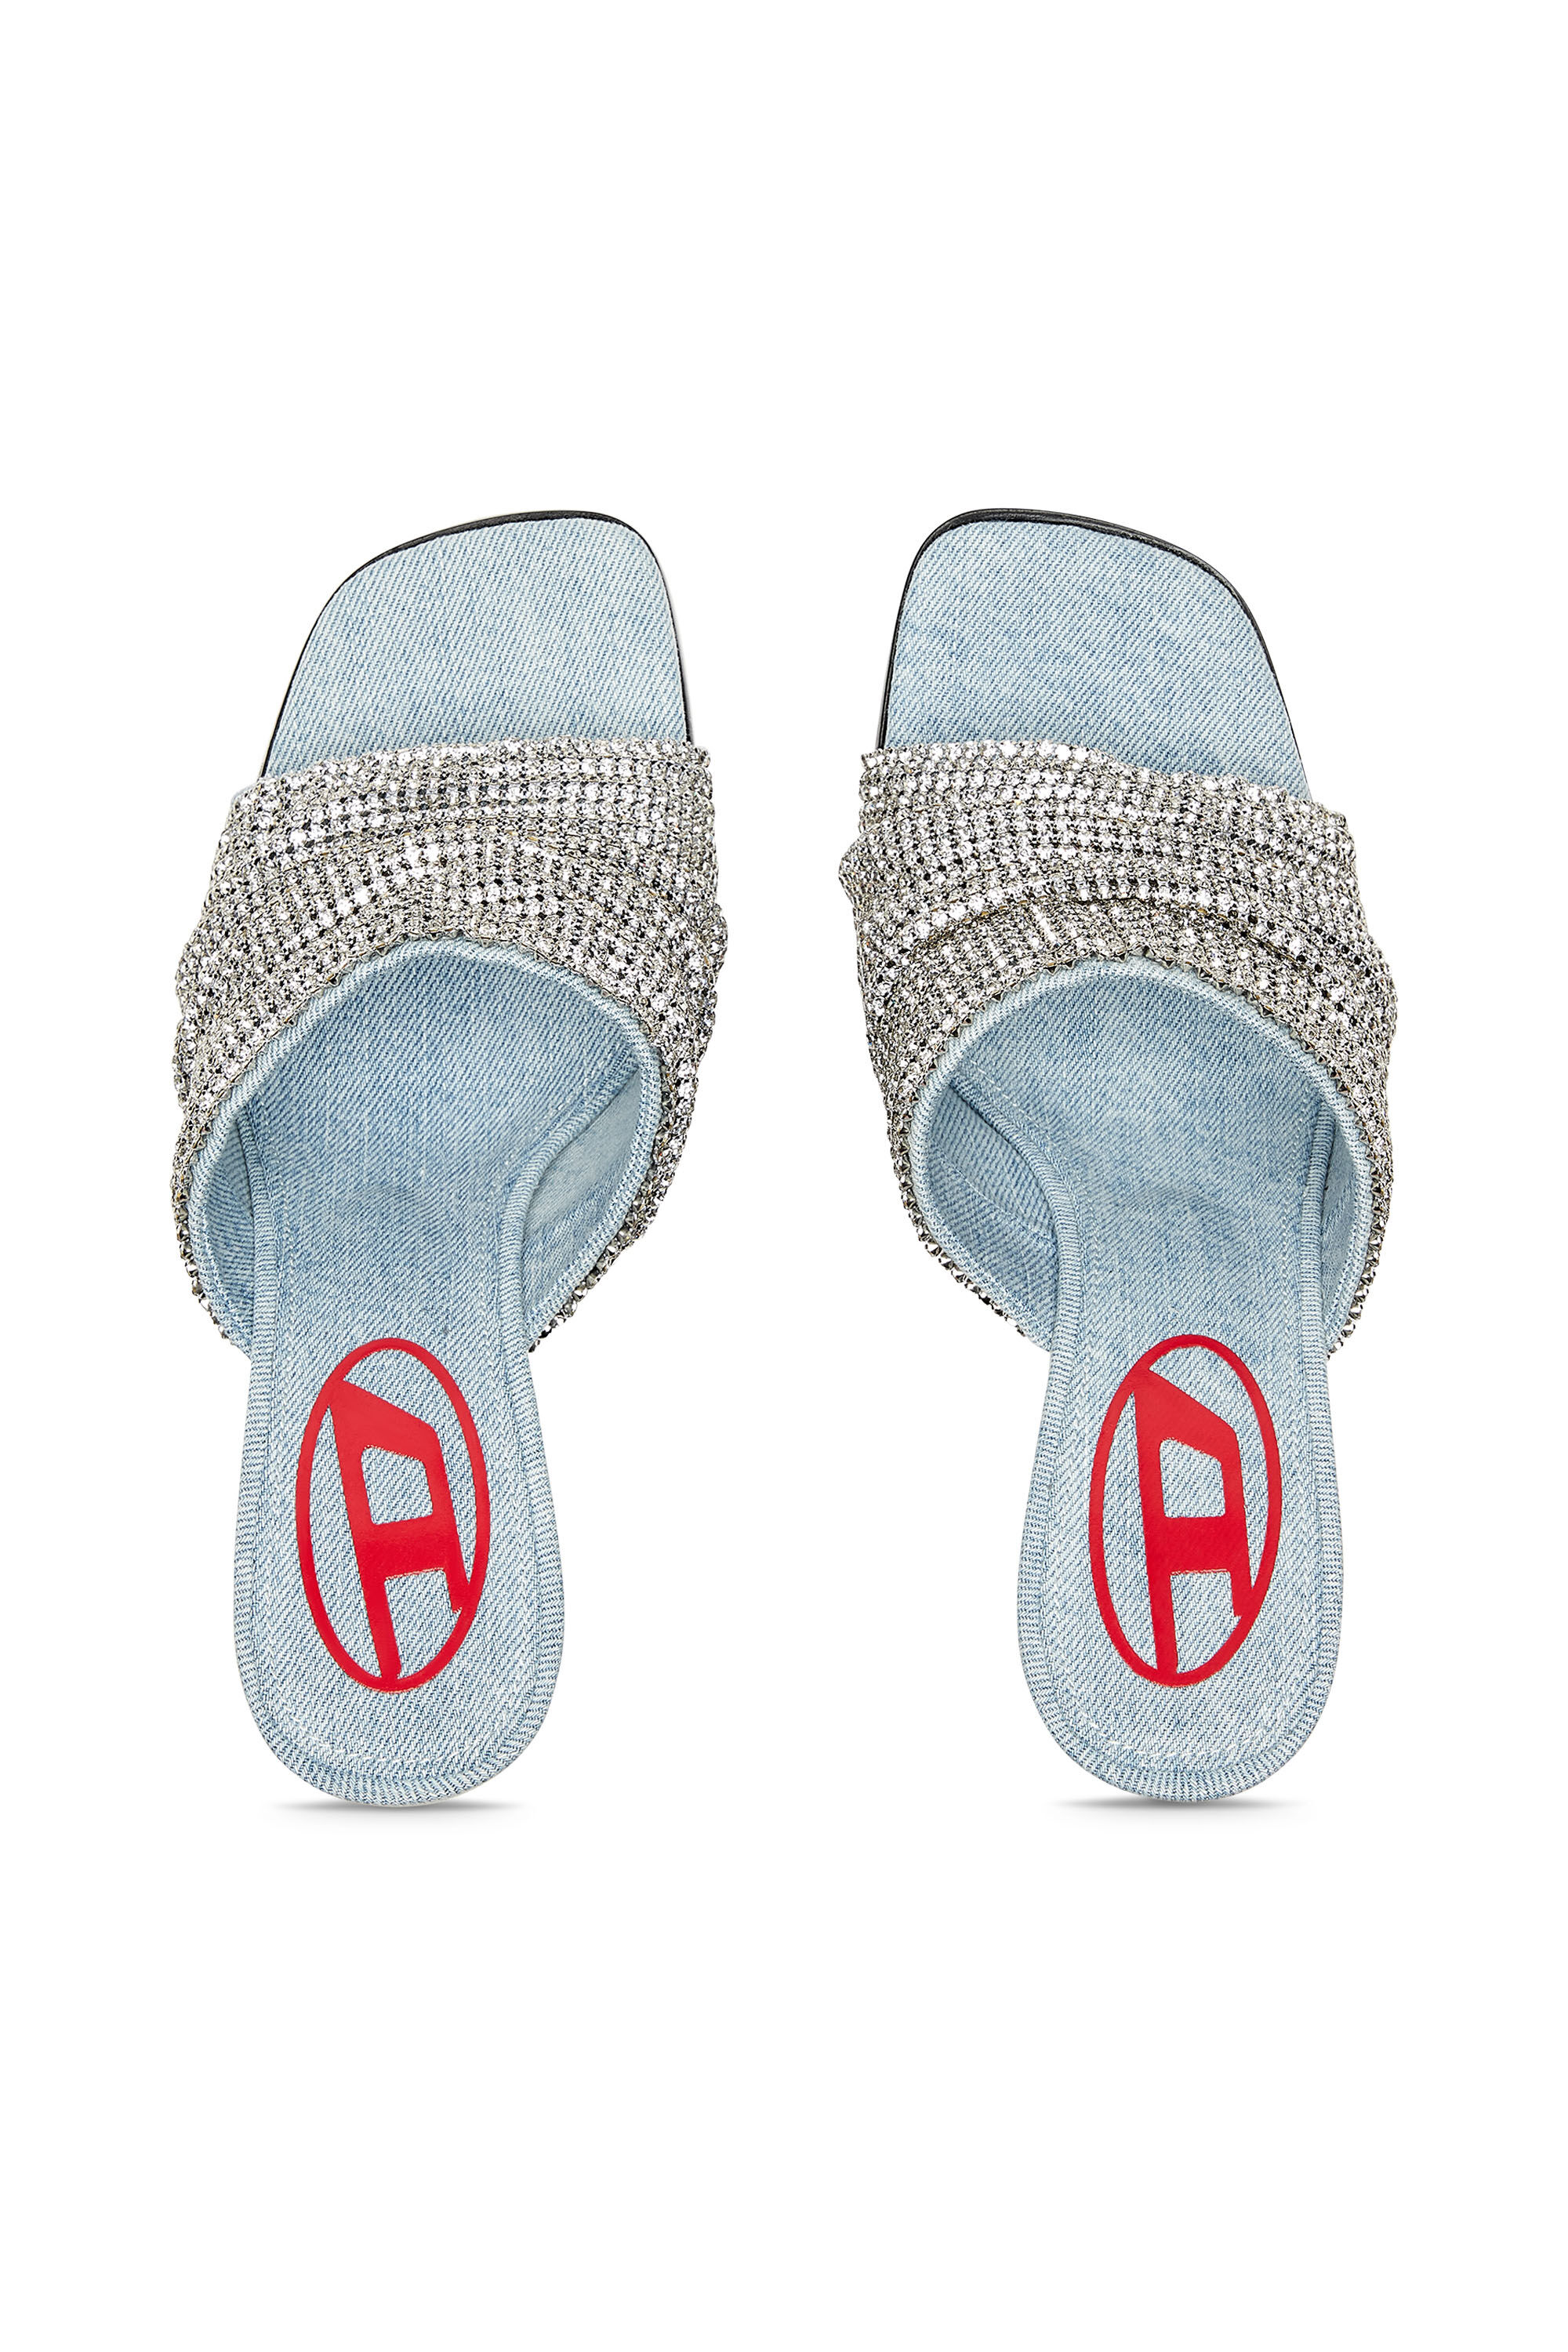 Diesel - D-SYDNEY SDL S, Female D-Sydney Sdl S Sandals - Mule sandals with rhinestone band in Silver - Image 5